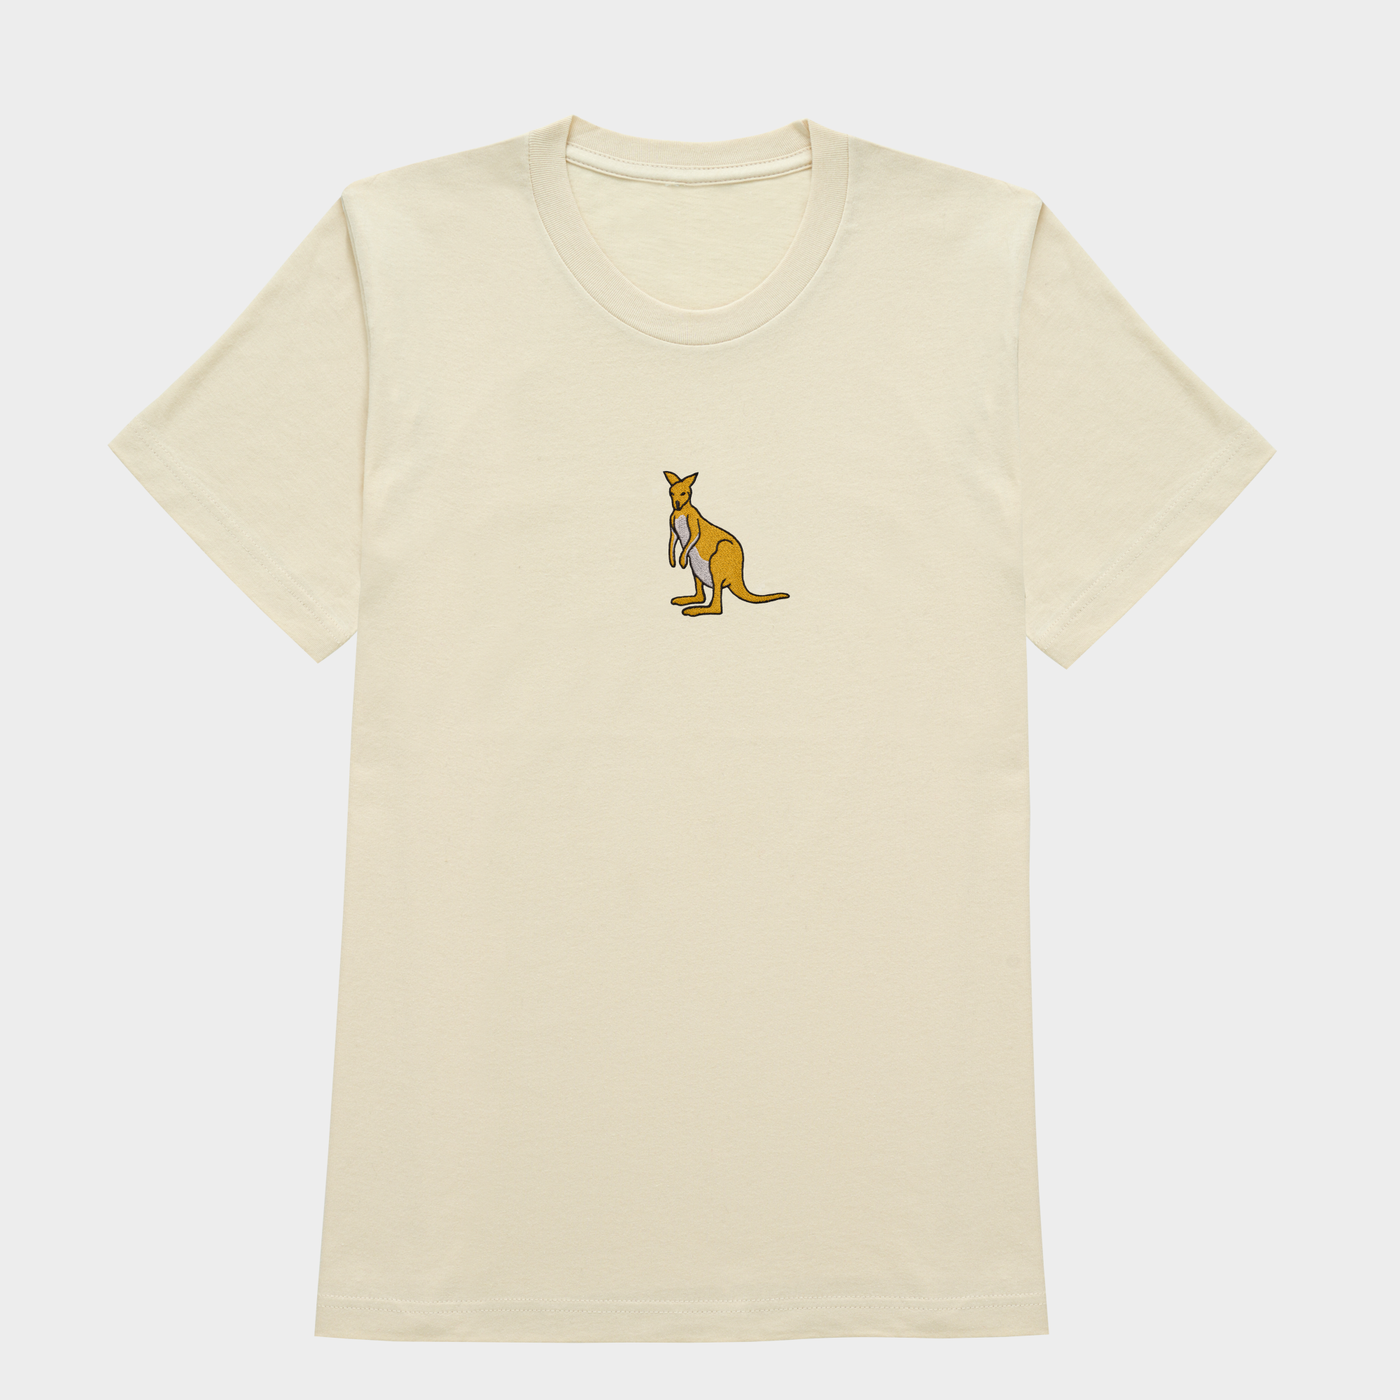 Bobby's Planet Women's Embroidered Kangaroo T-Shirt from Australia Down Under Animals Collection in Soft Cream Color#color_soft-cream